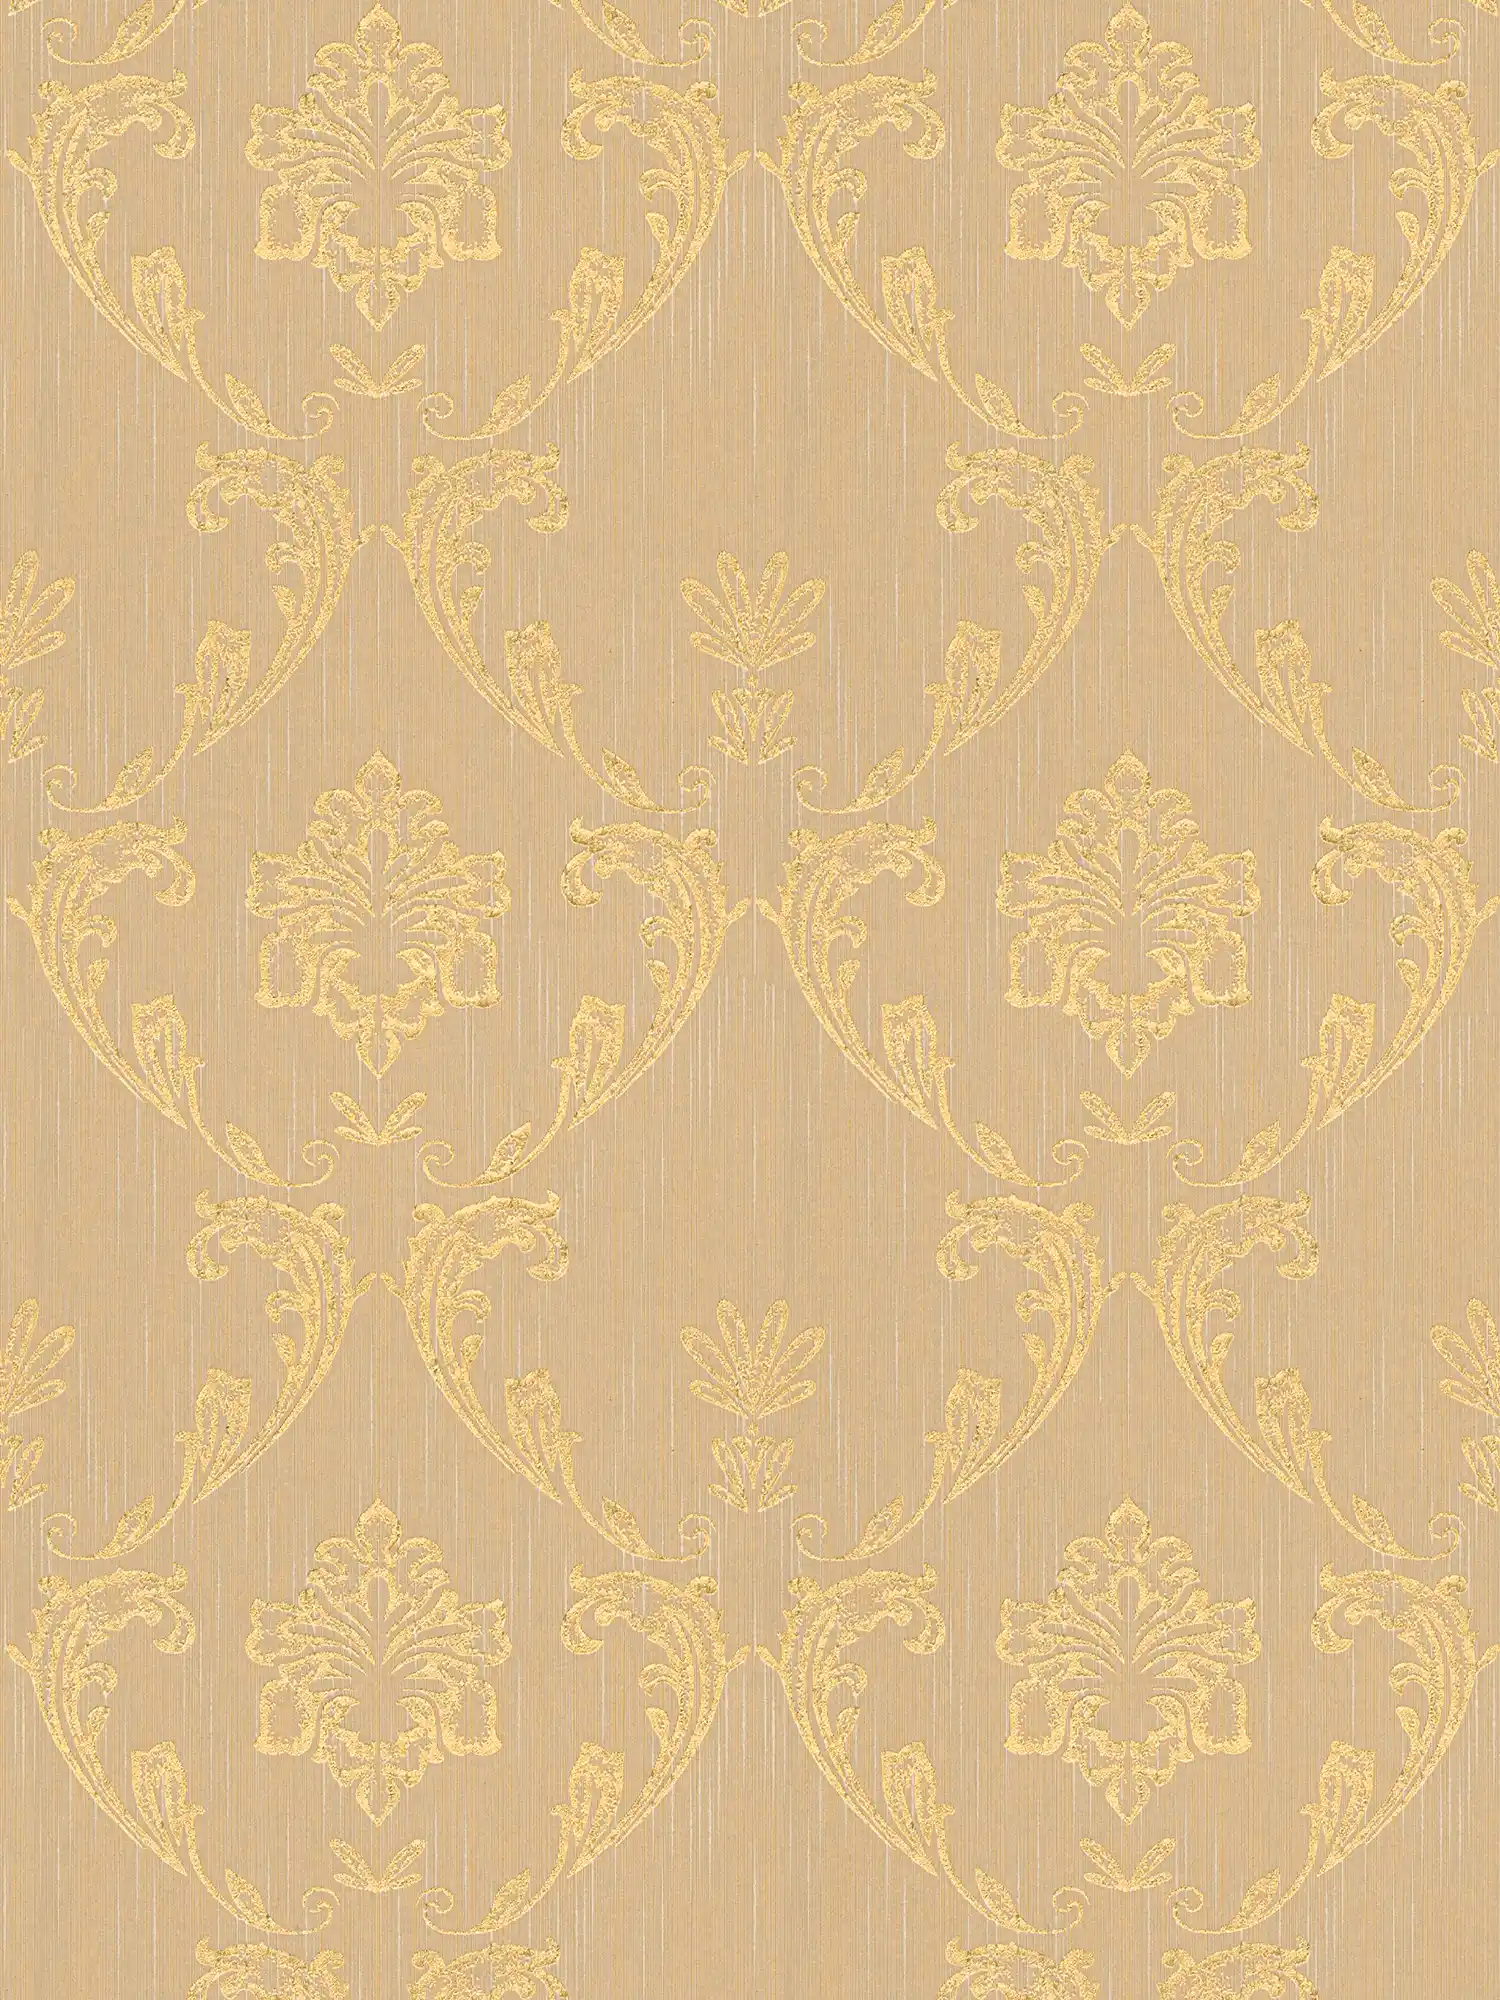 Ornamental wallpaper with floral elements in gold - gold, beige
